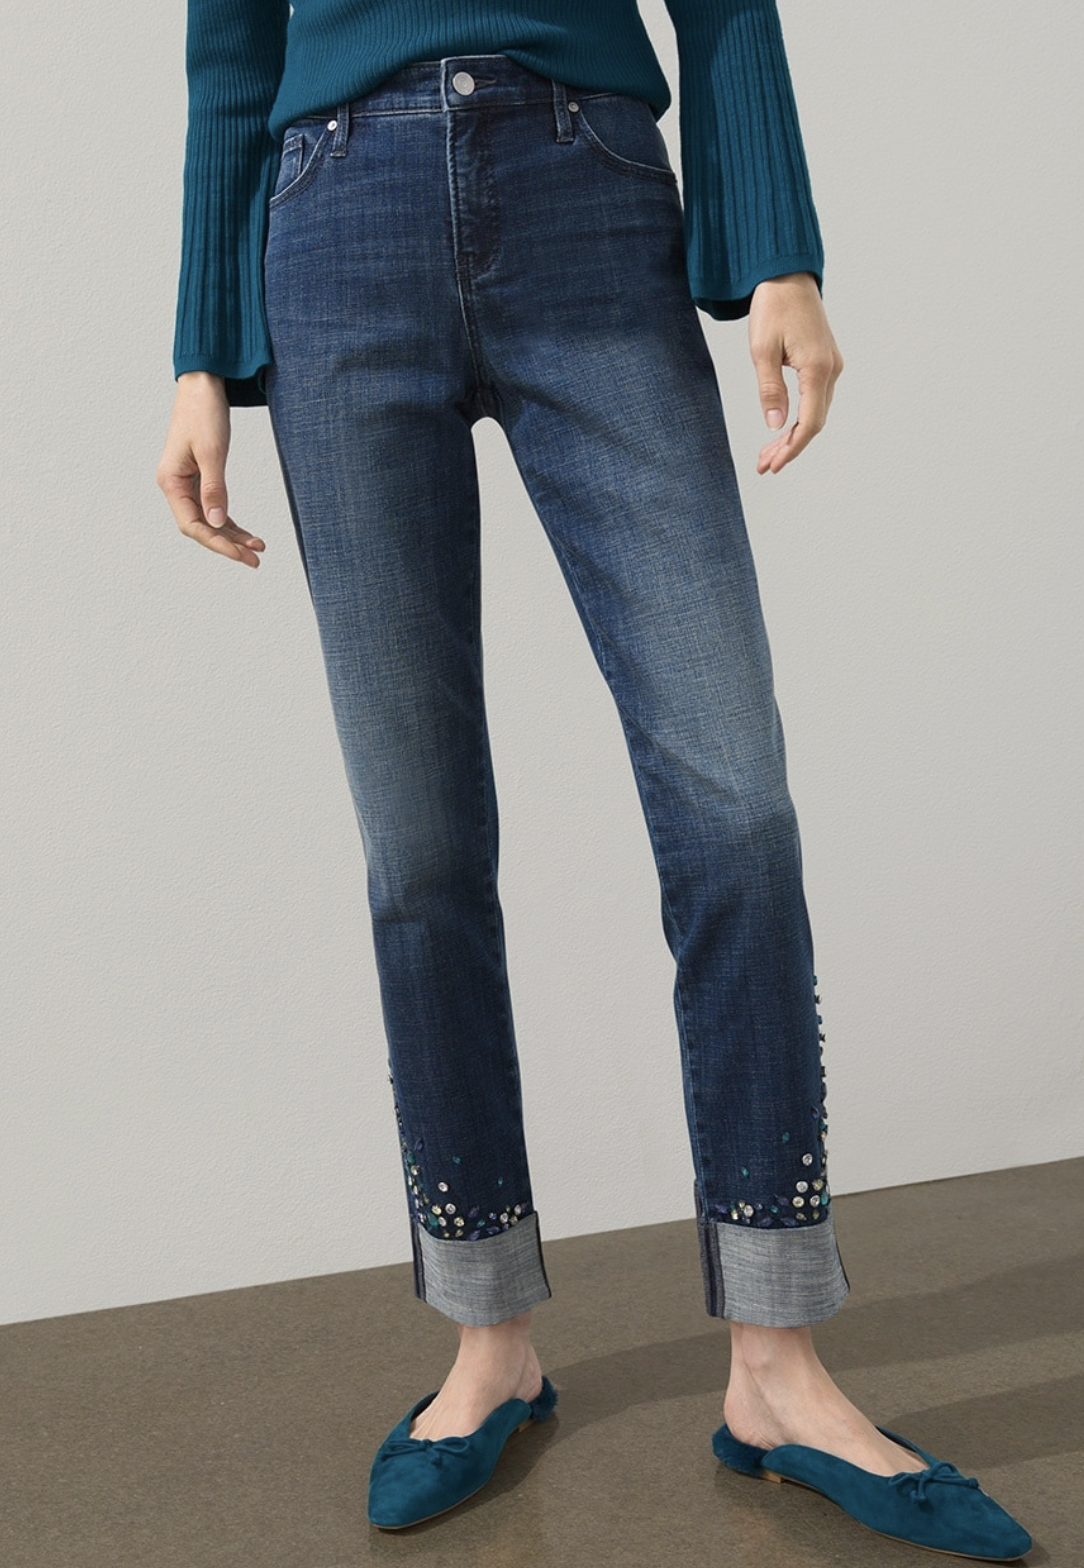 Girlfriend Jewel Cuff Ankle Jeans at Chico’s